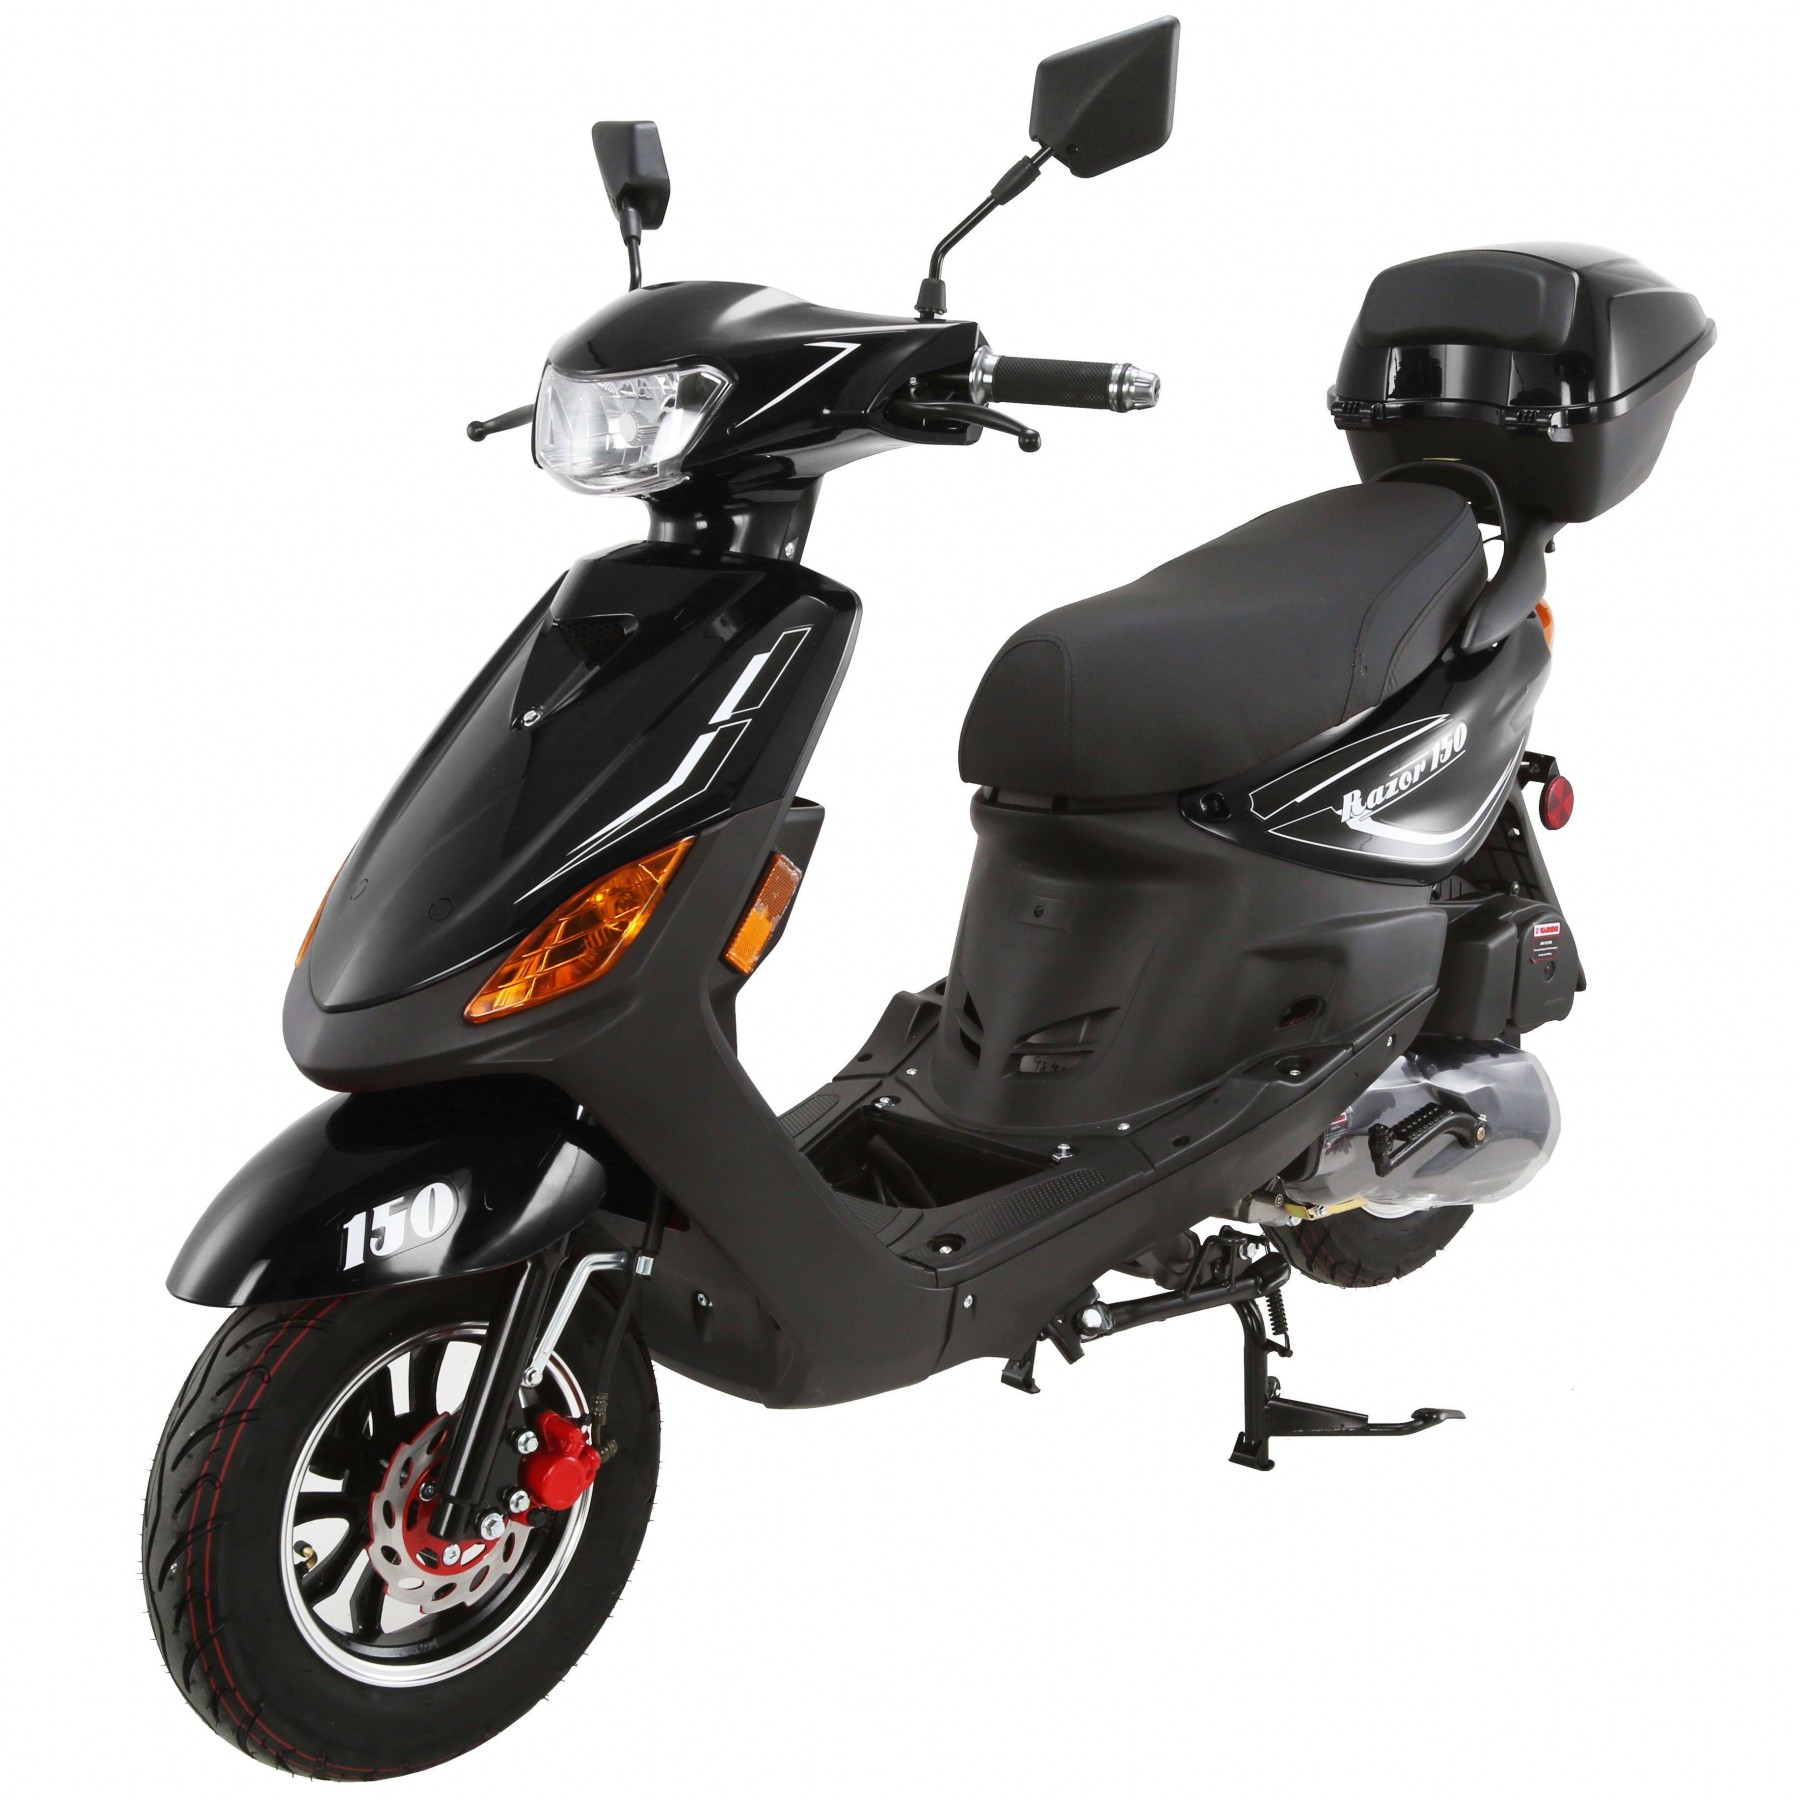 Afskedigelse Distrahere fusion 150cc Moped Scooter RZ 150 Black with New Design Sporty Look, Black wheel,  Electric and Kick Start, Low Seat Height | redfoxpowersports